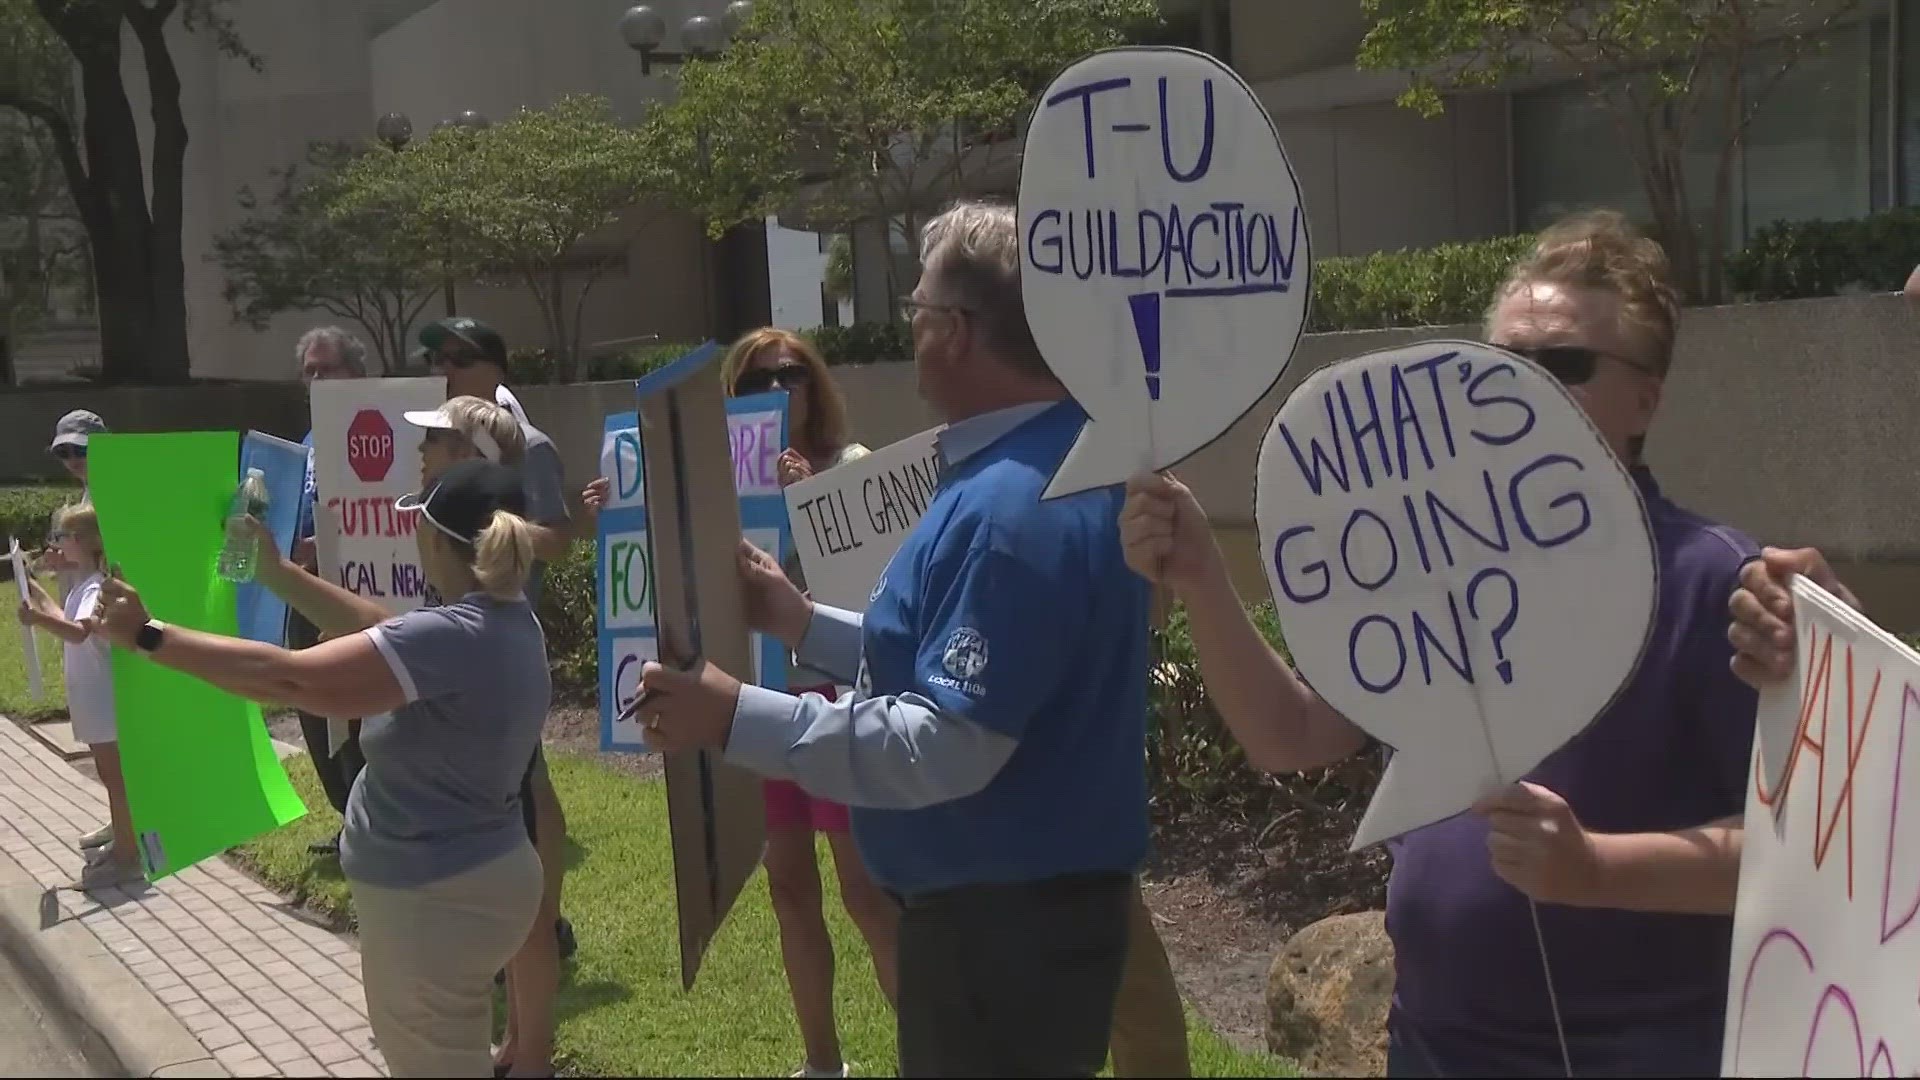 Florida Times-Union Guild workers are joining a wave of newsroom strikes across the country, demanding increased wages from their corporate owner Gannett.